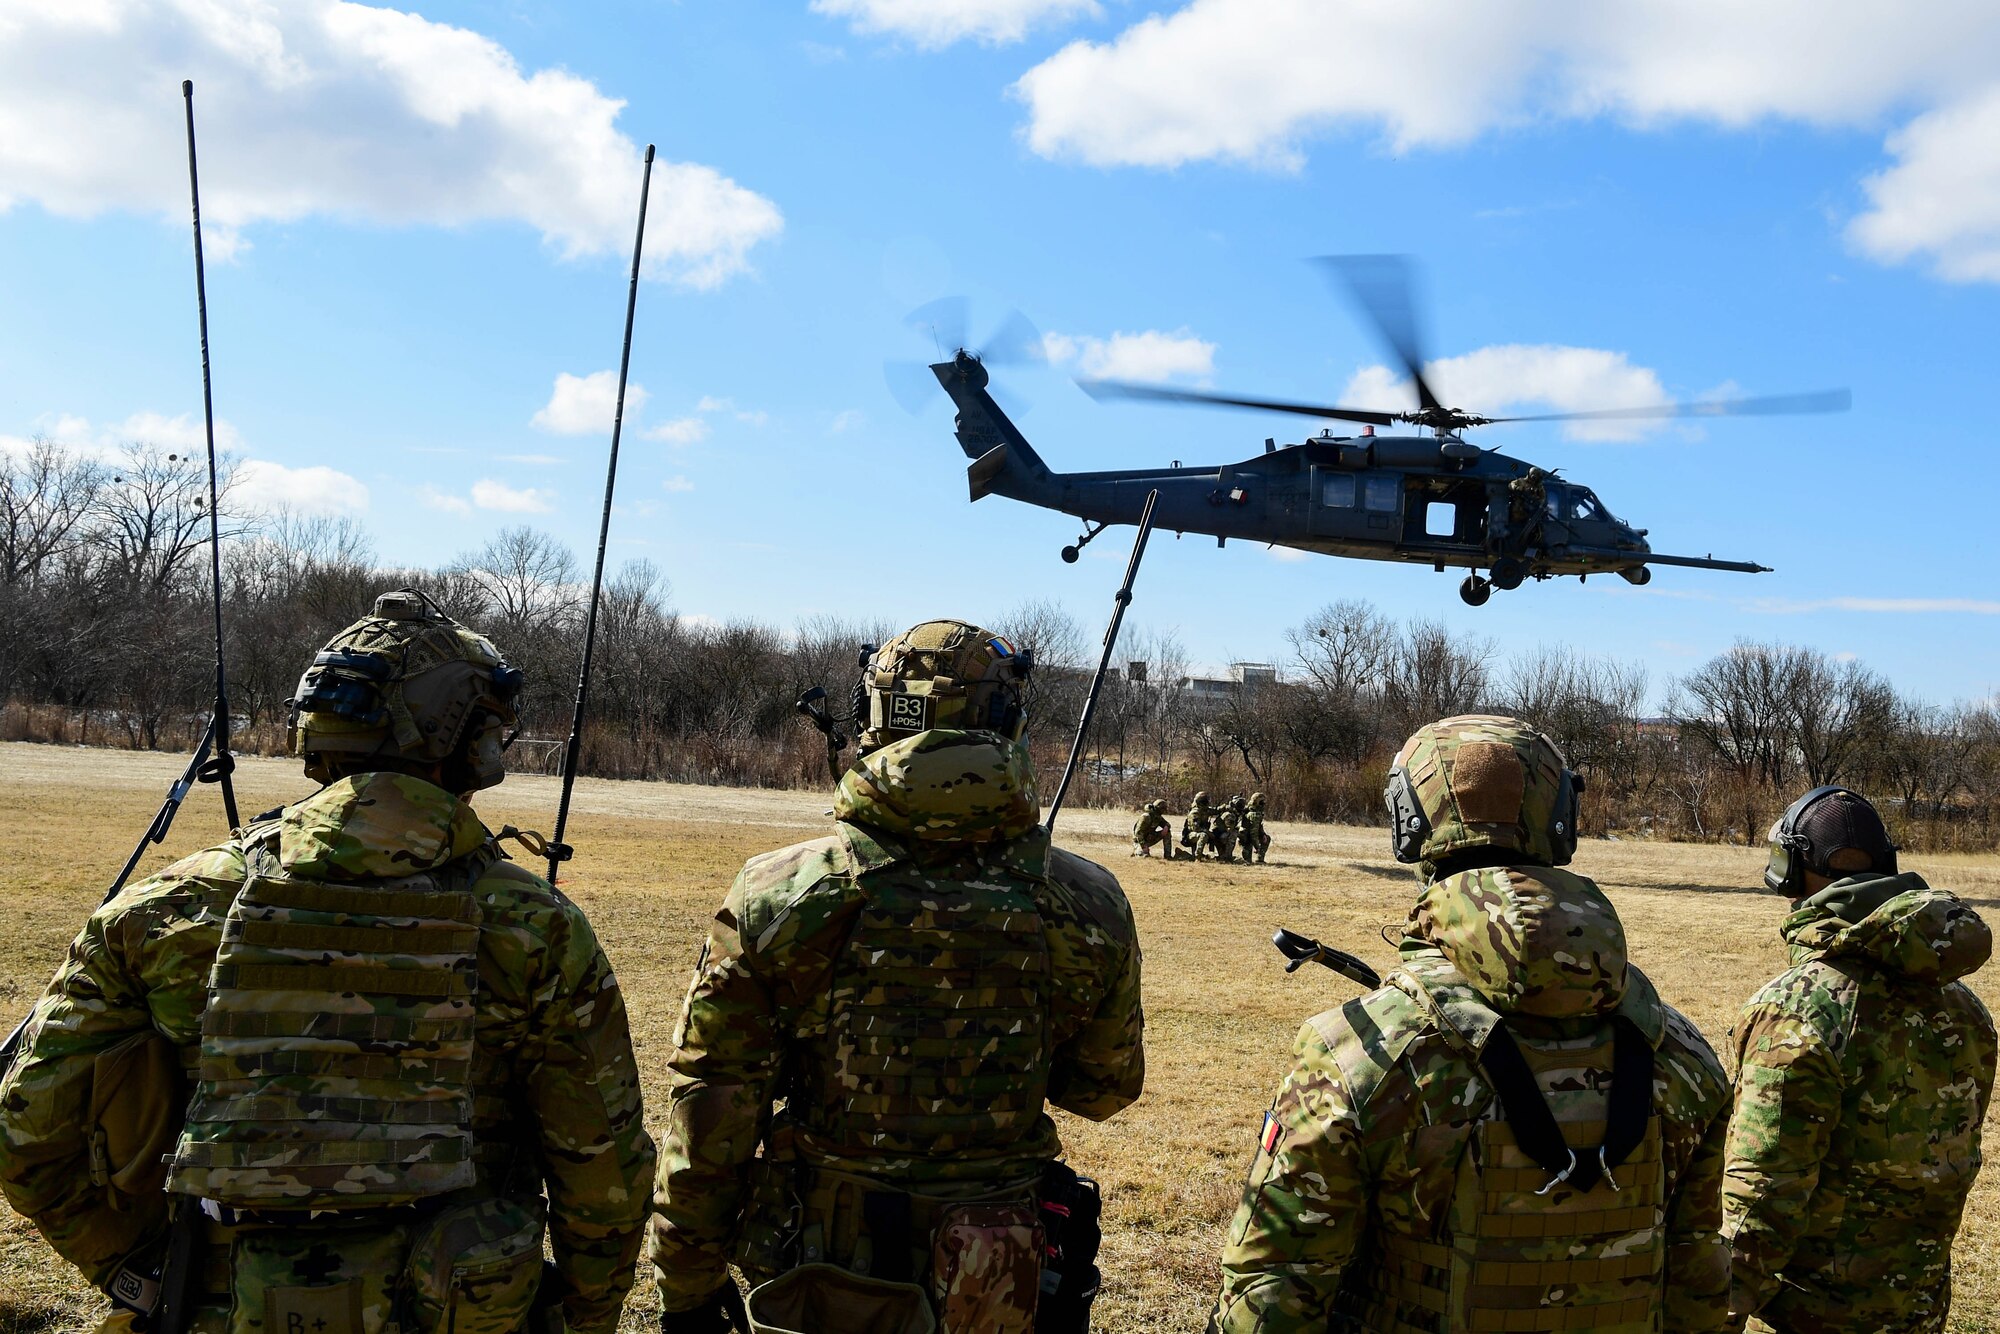 The 51st Commando Battalion Romanian Special Forces offload an HH-60G Pave Hawk assigned to the 56th Rescue Squadron in Romania, March 9, 2022. The 57th RQS and the 56th RQS alongside the Royal Marines Commando Mobile Air Operations team with Commando Helicopter Force provided various training to Romanian forces, including on and offloading a helicopter. (U.S. Air Force Photo by Senior Airman Noah Sudolcan)